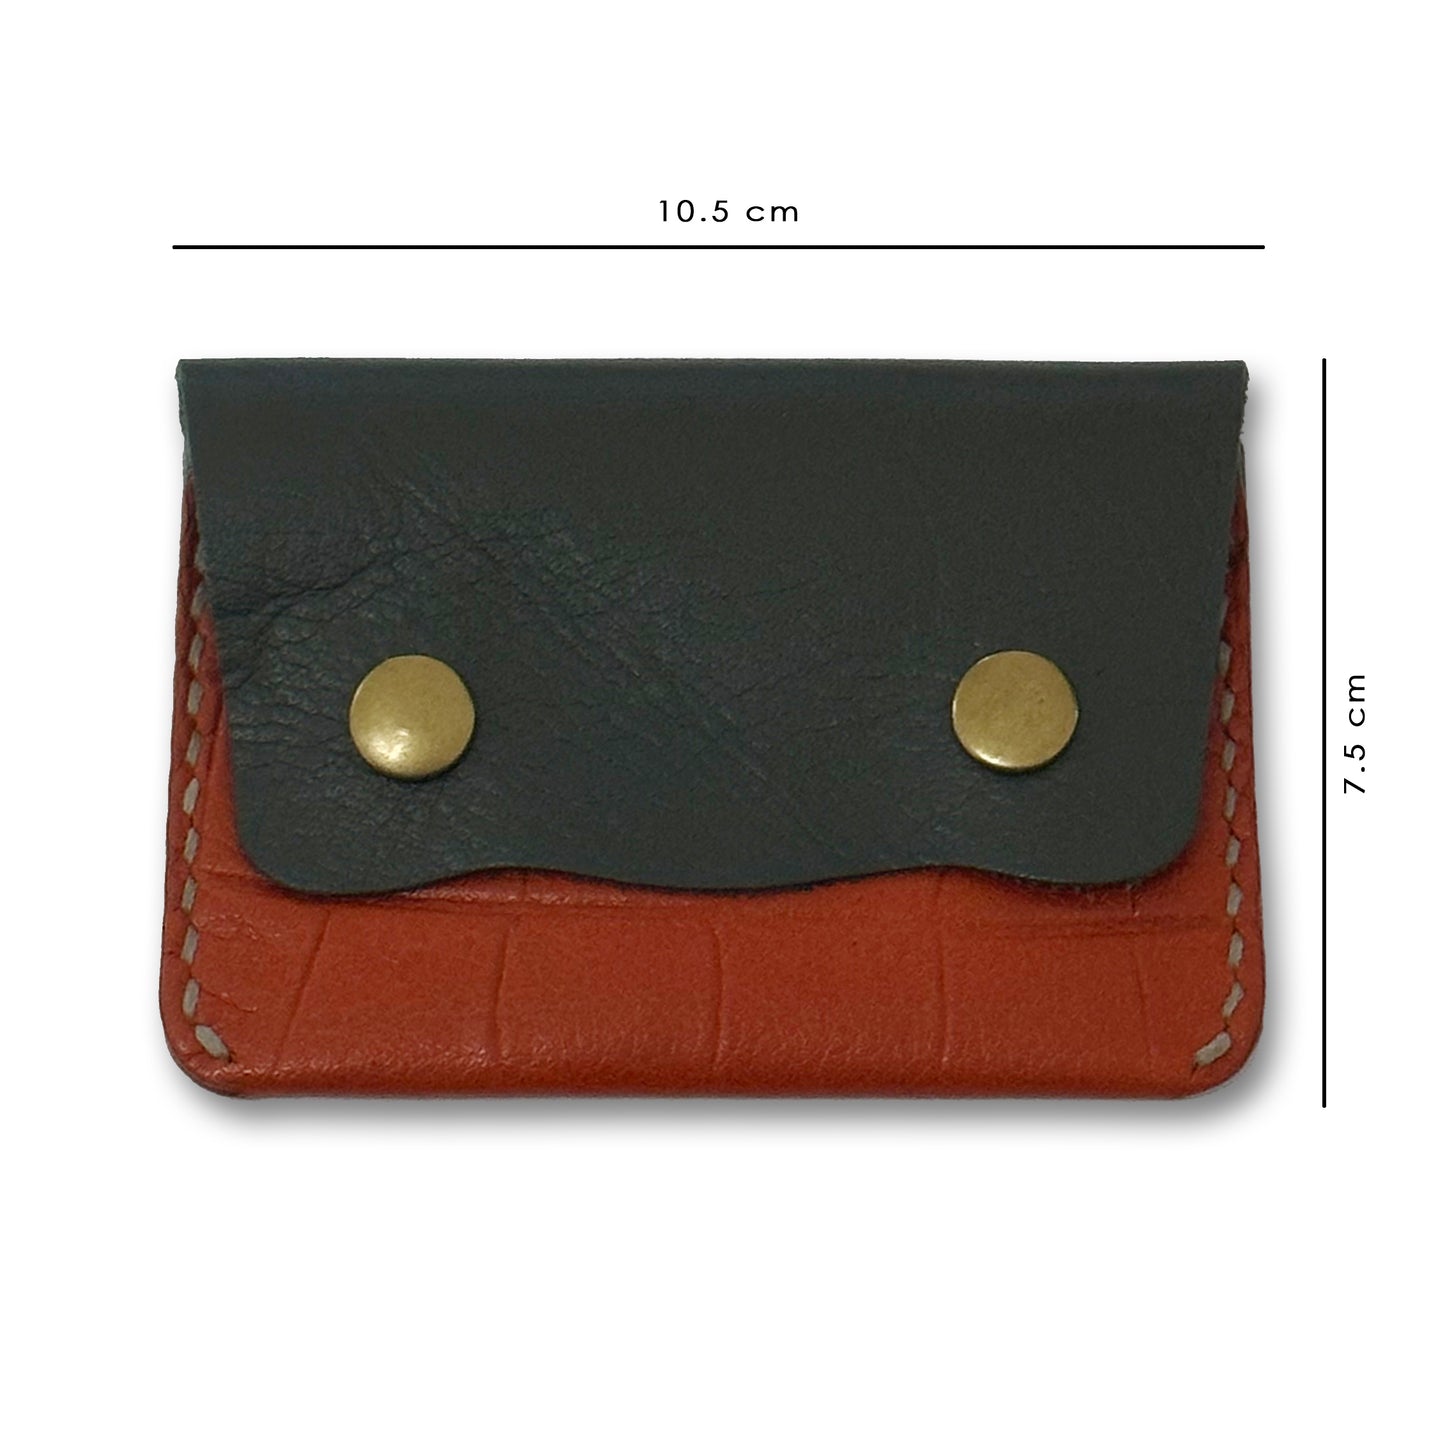 Cameo Wallet - Red Hot